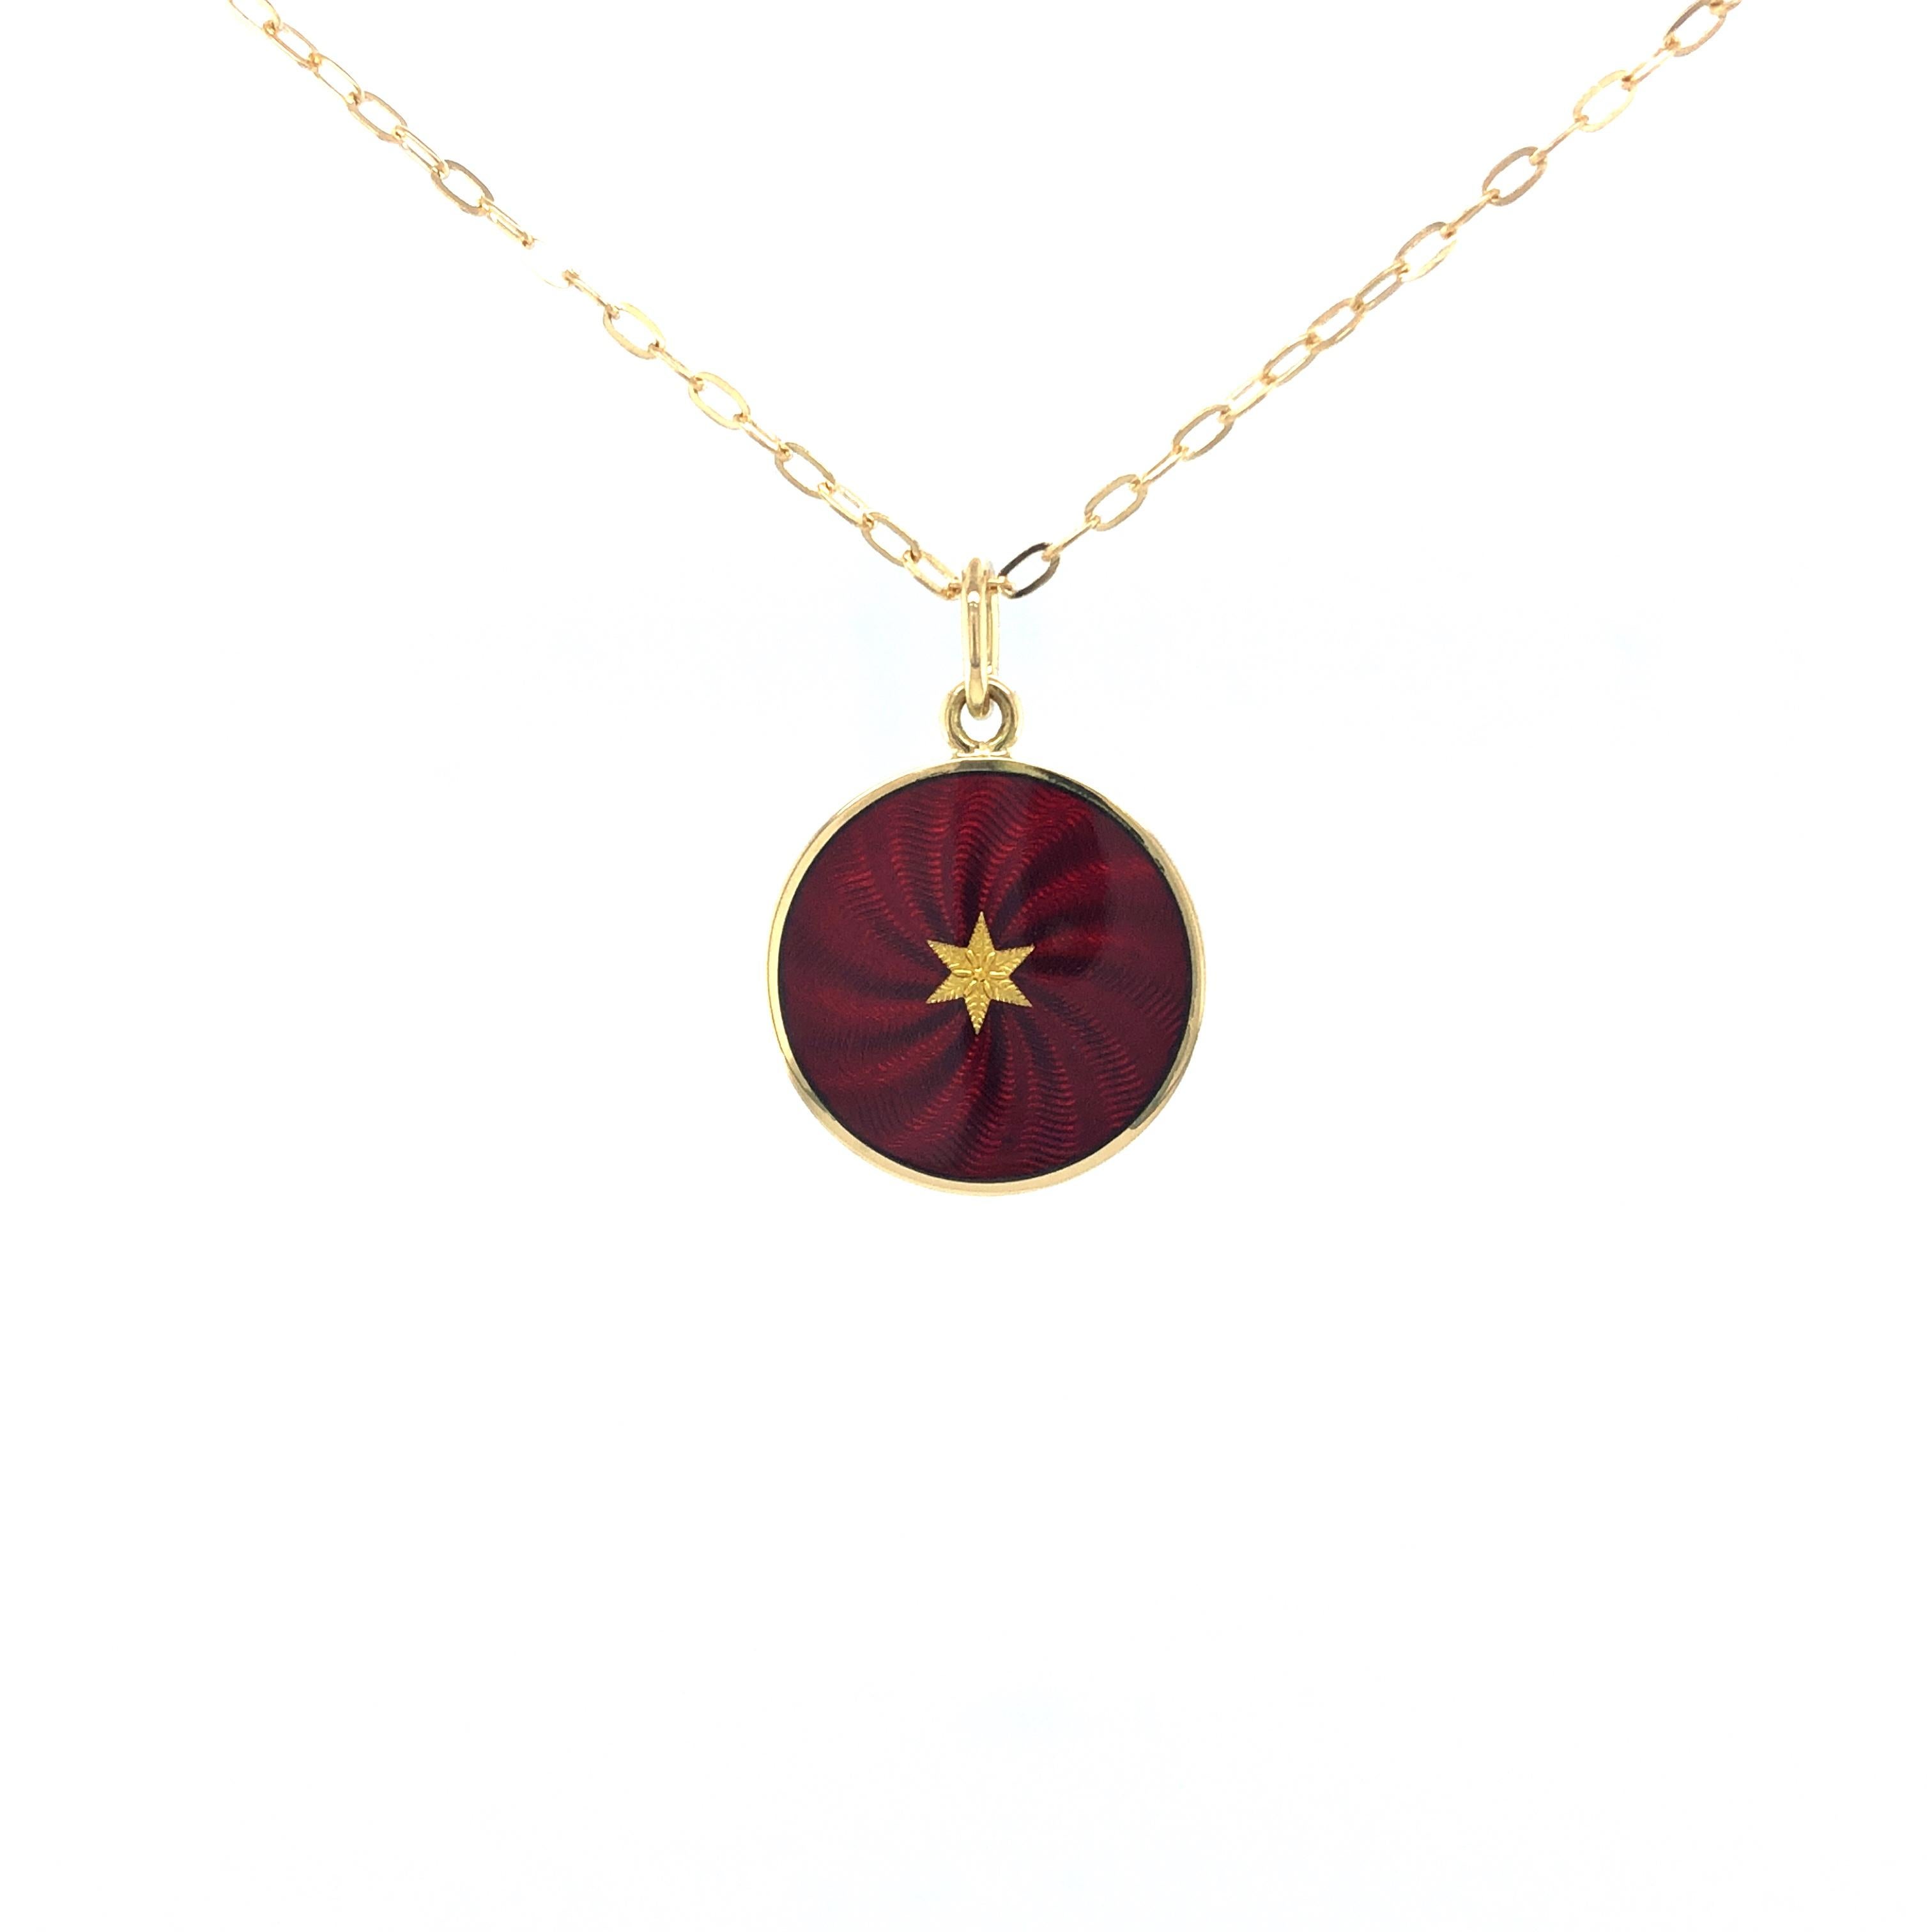 Round Disk Pendant Necklace - 18k Yellow Gold - Burgundy Red Enamel Guilloche  For Sale 1